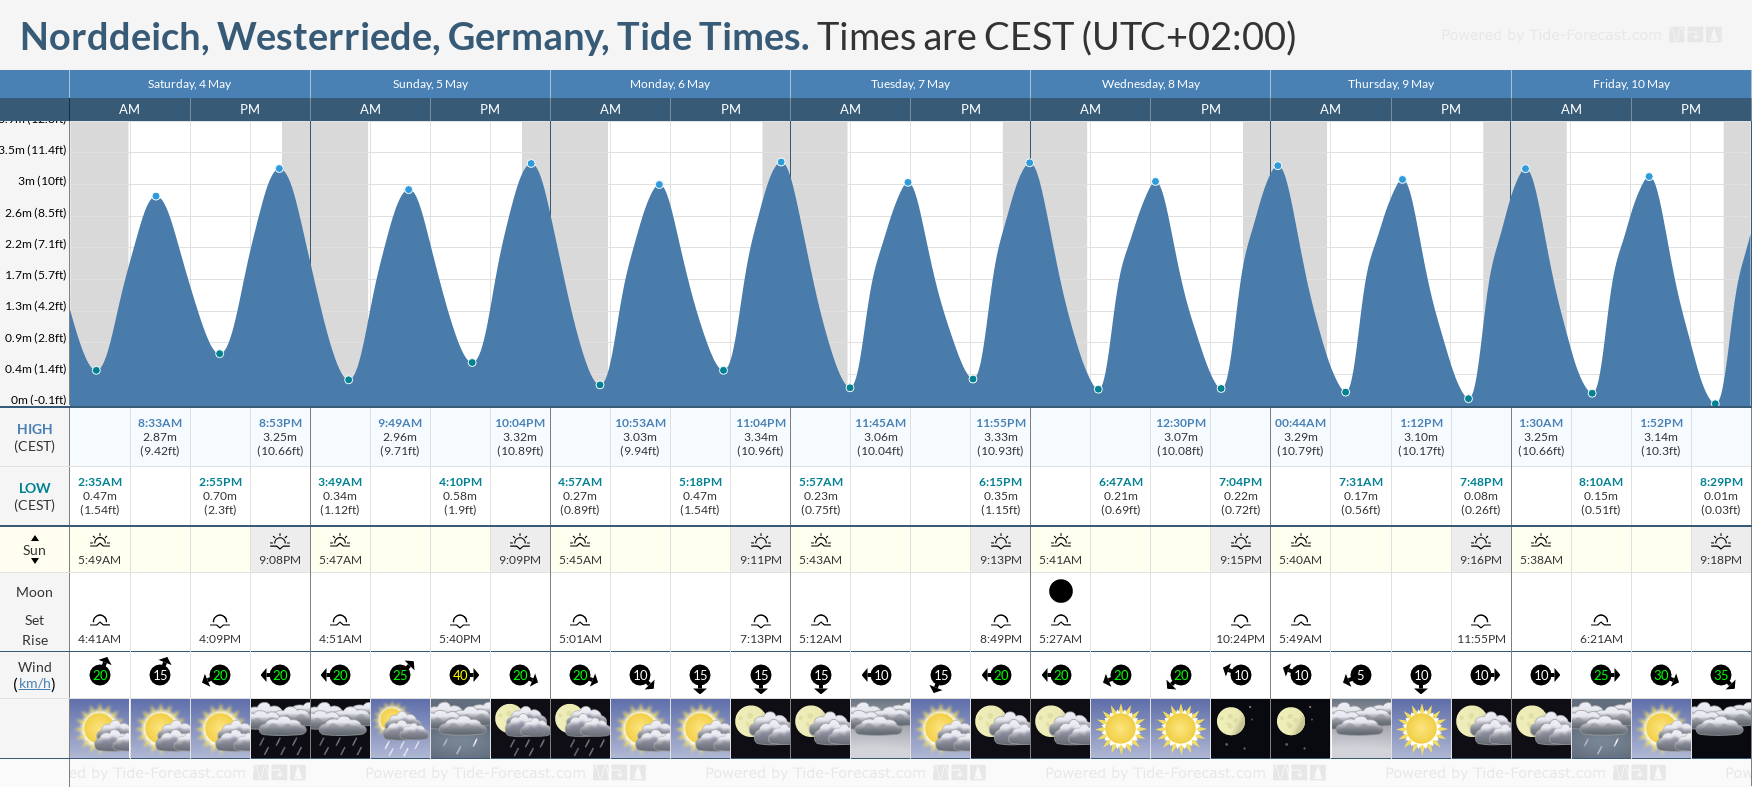 Norddeich, Westerriede, Germany Tide Chart including high and low tide tide times for the next 7 days